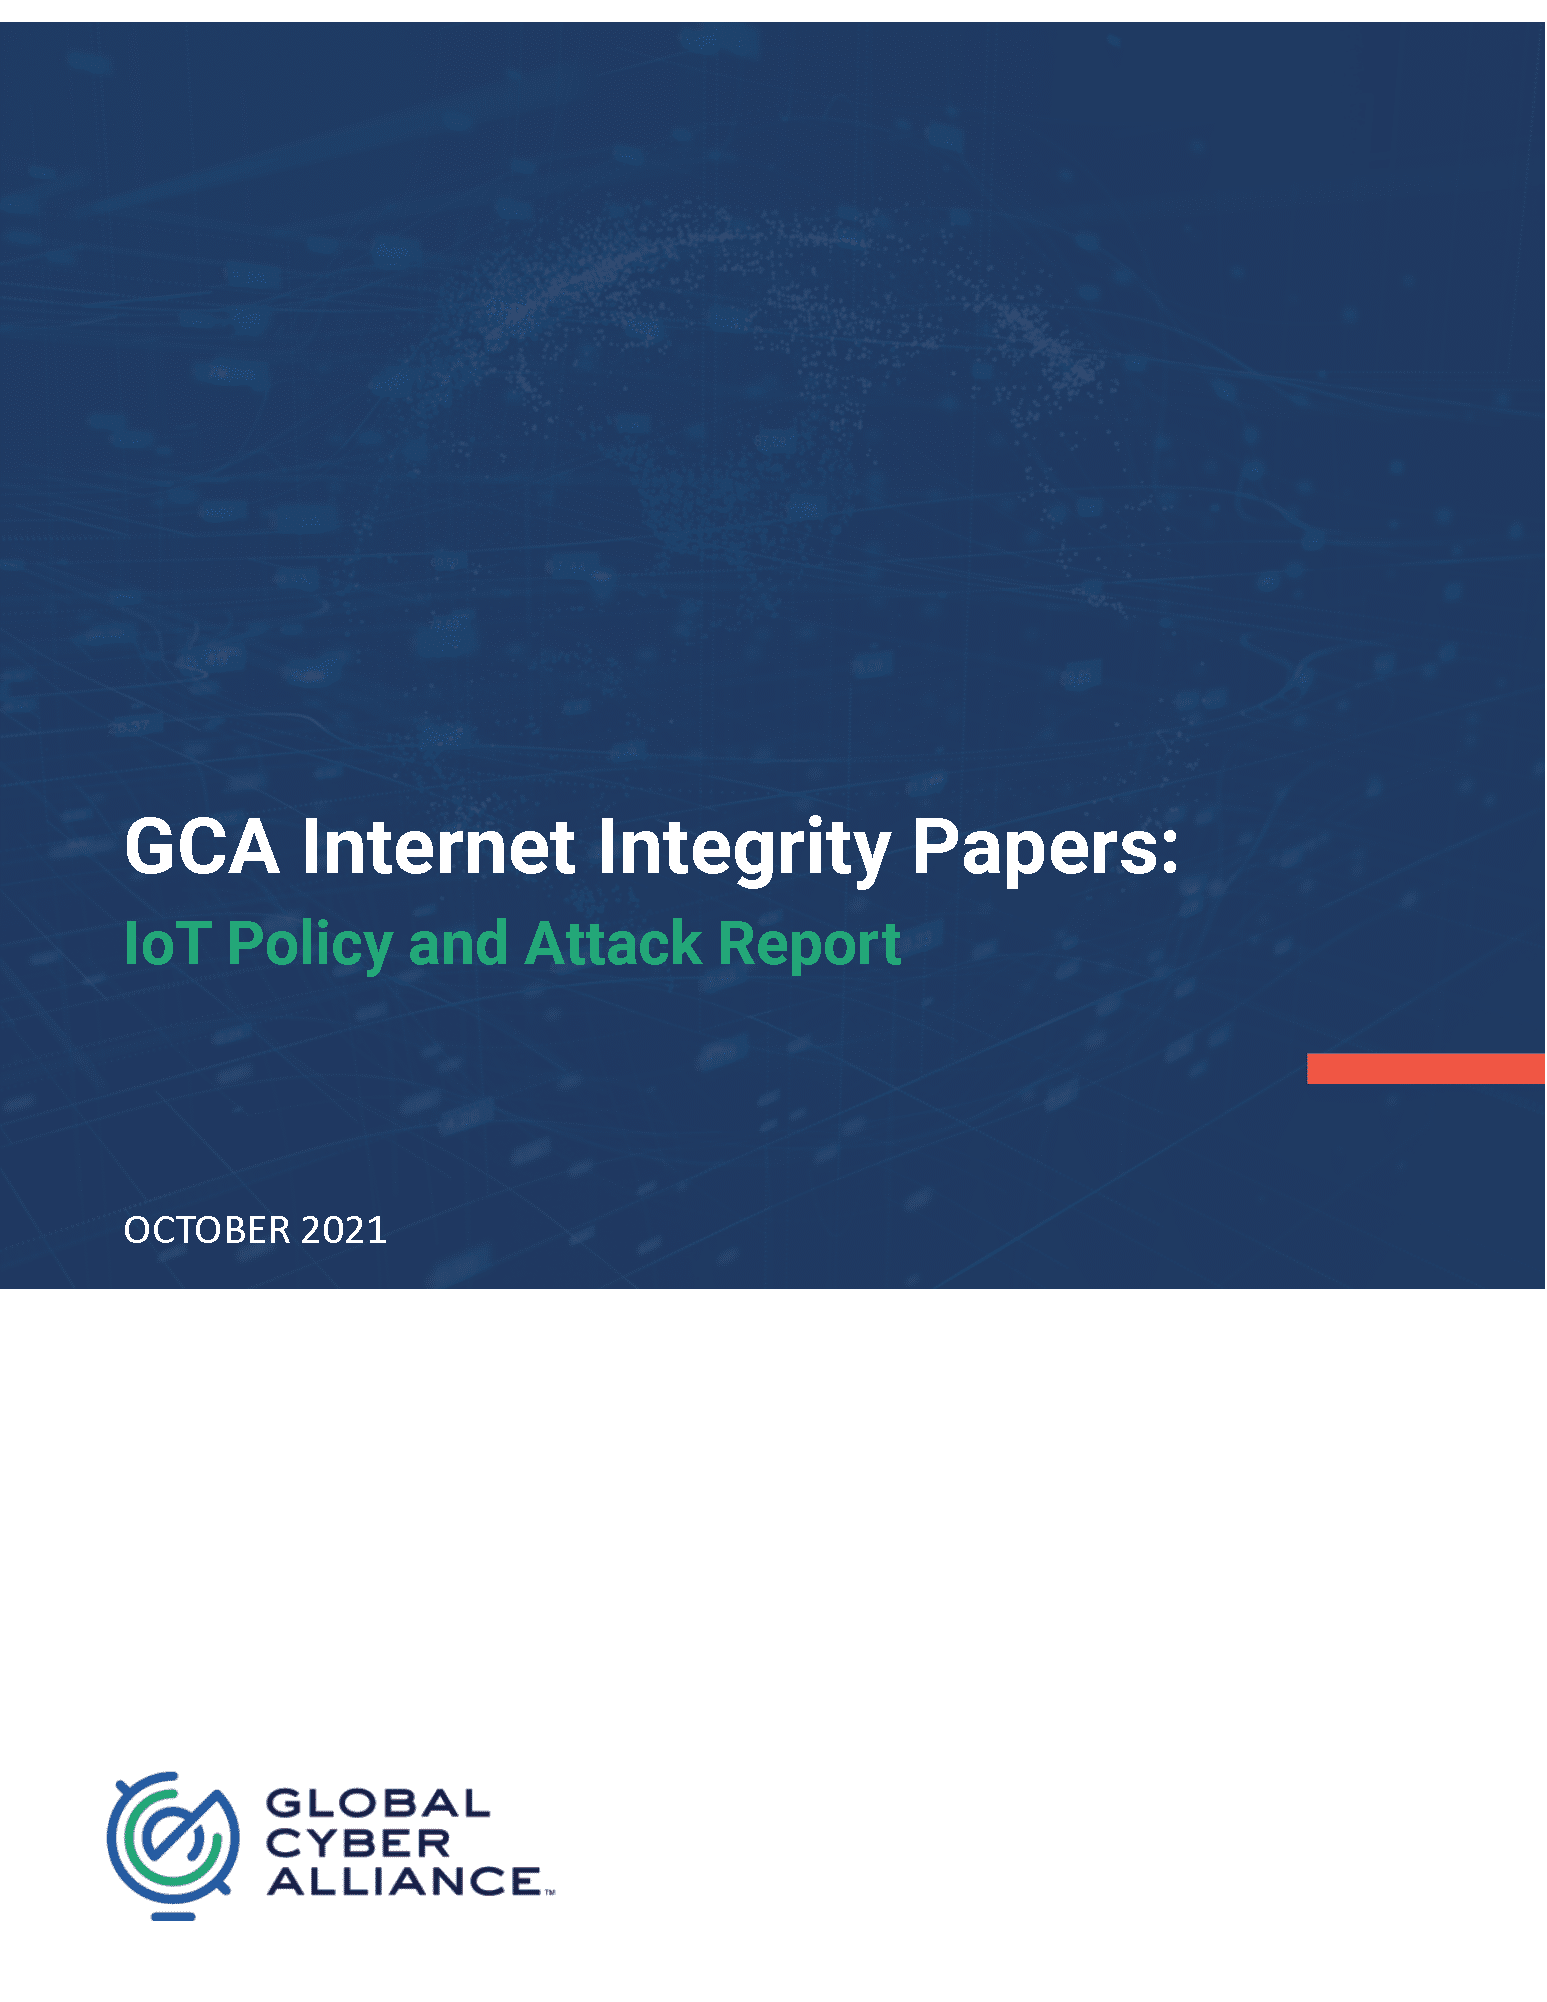 IoT Policy and Attack Report Cover Image